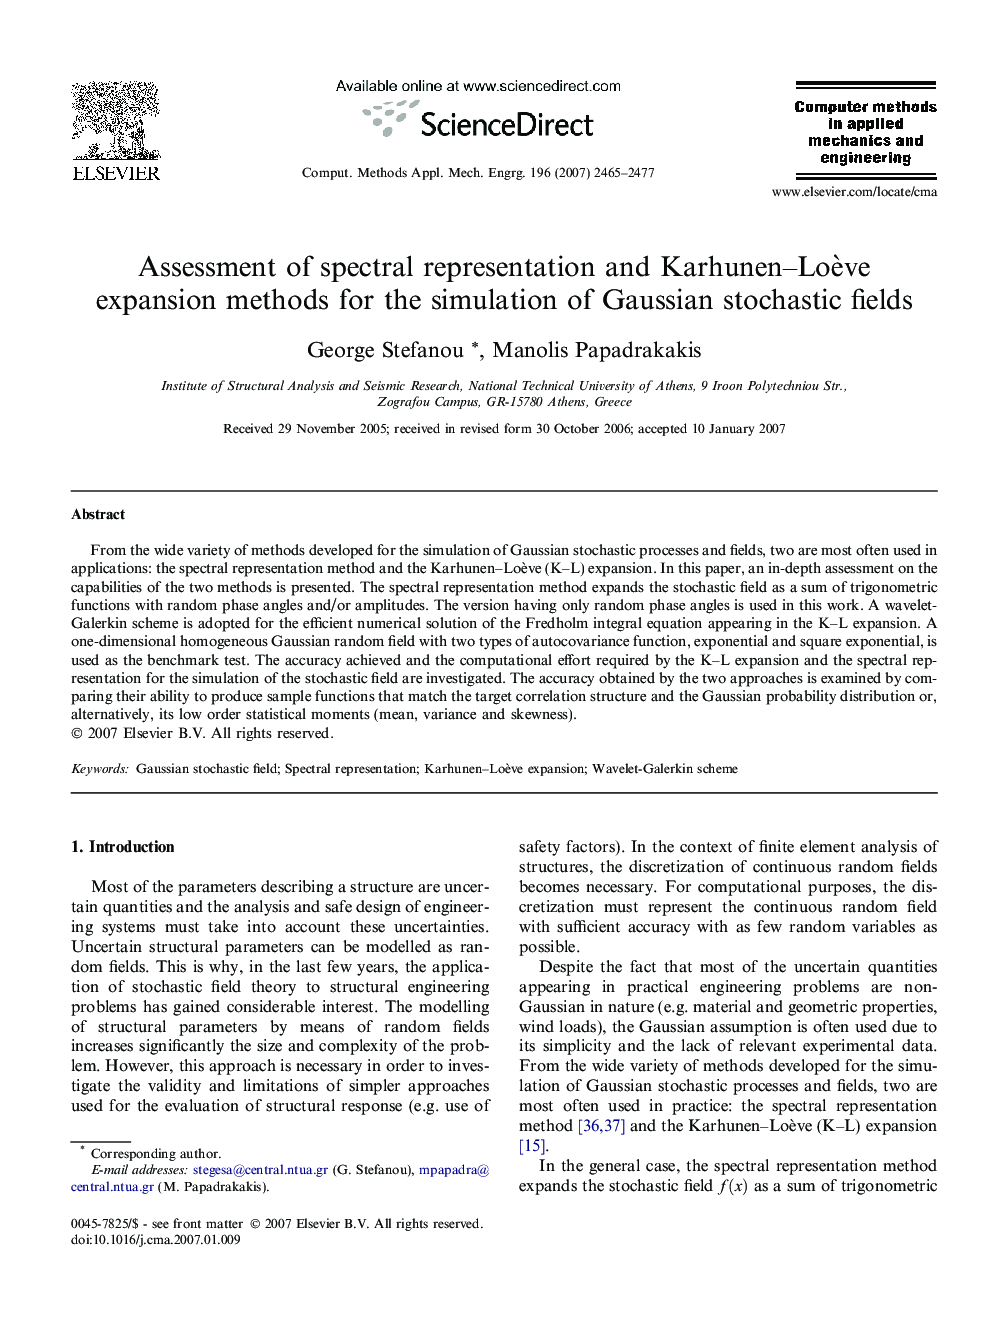 Assessment of spectral representation and Karhunen–Loève expansion methods for the simulation of Gaussian stochastic fields